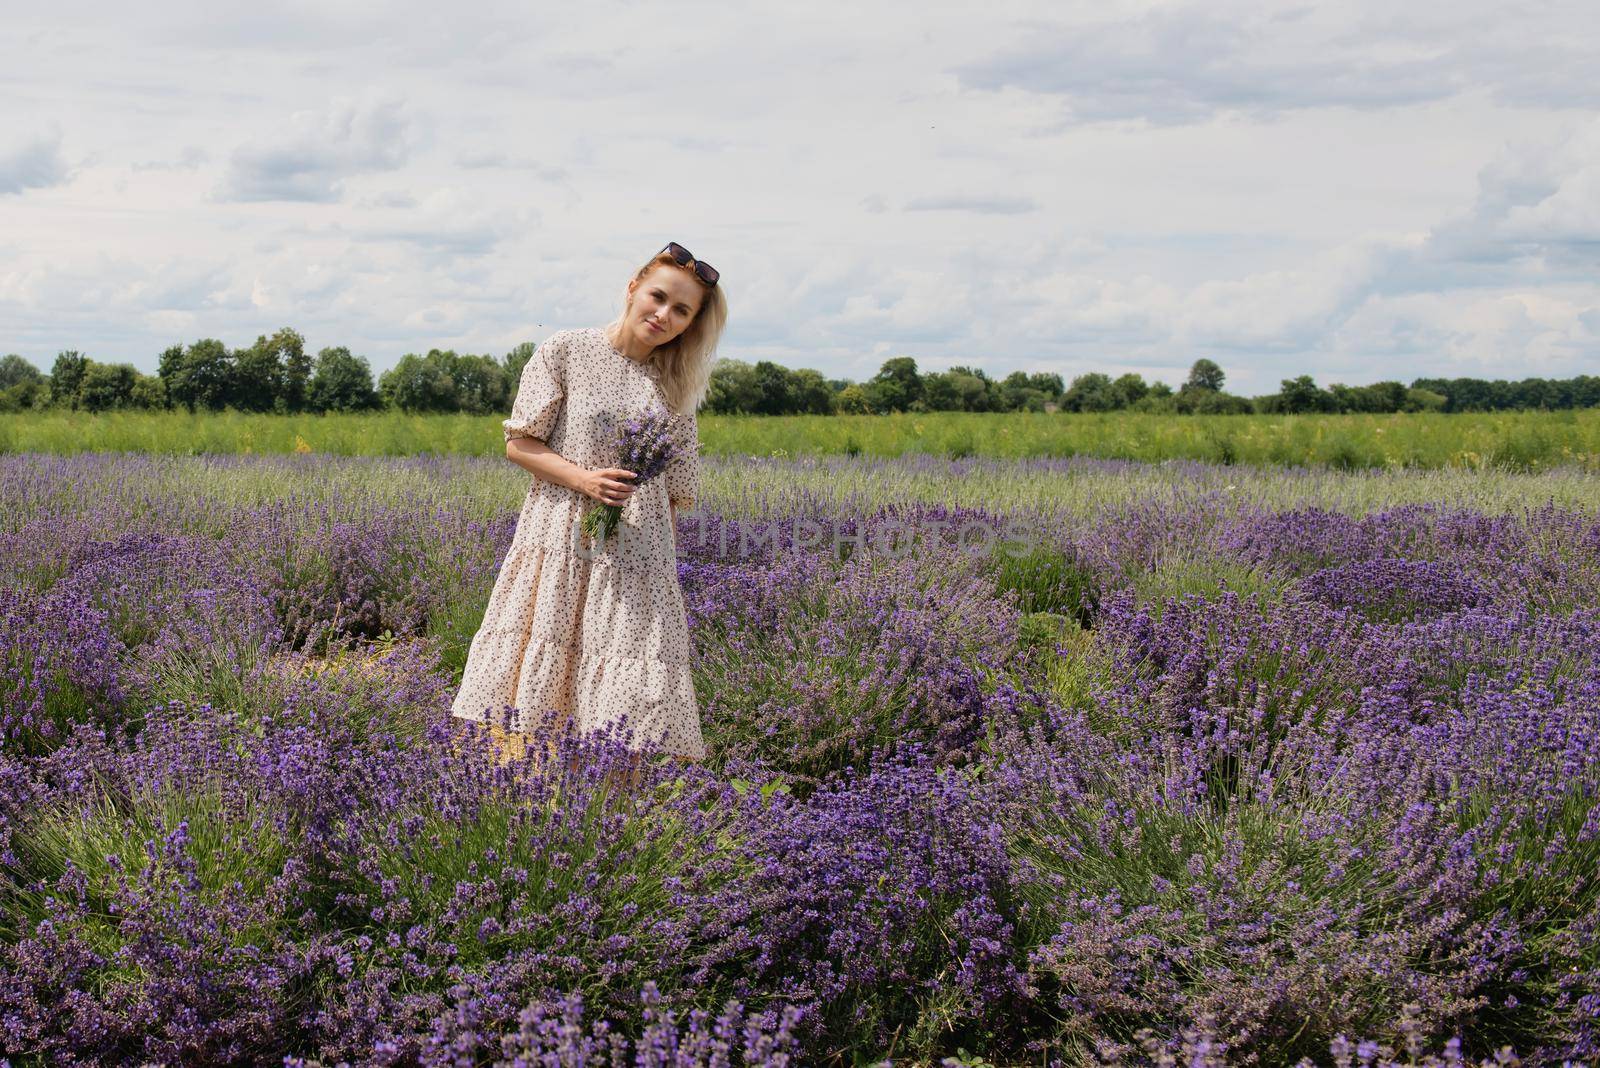 Young woman in a lavender field holding a bouquet of lavender a sunny day.